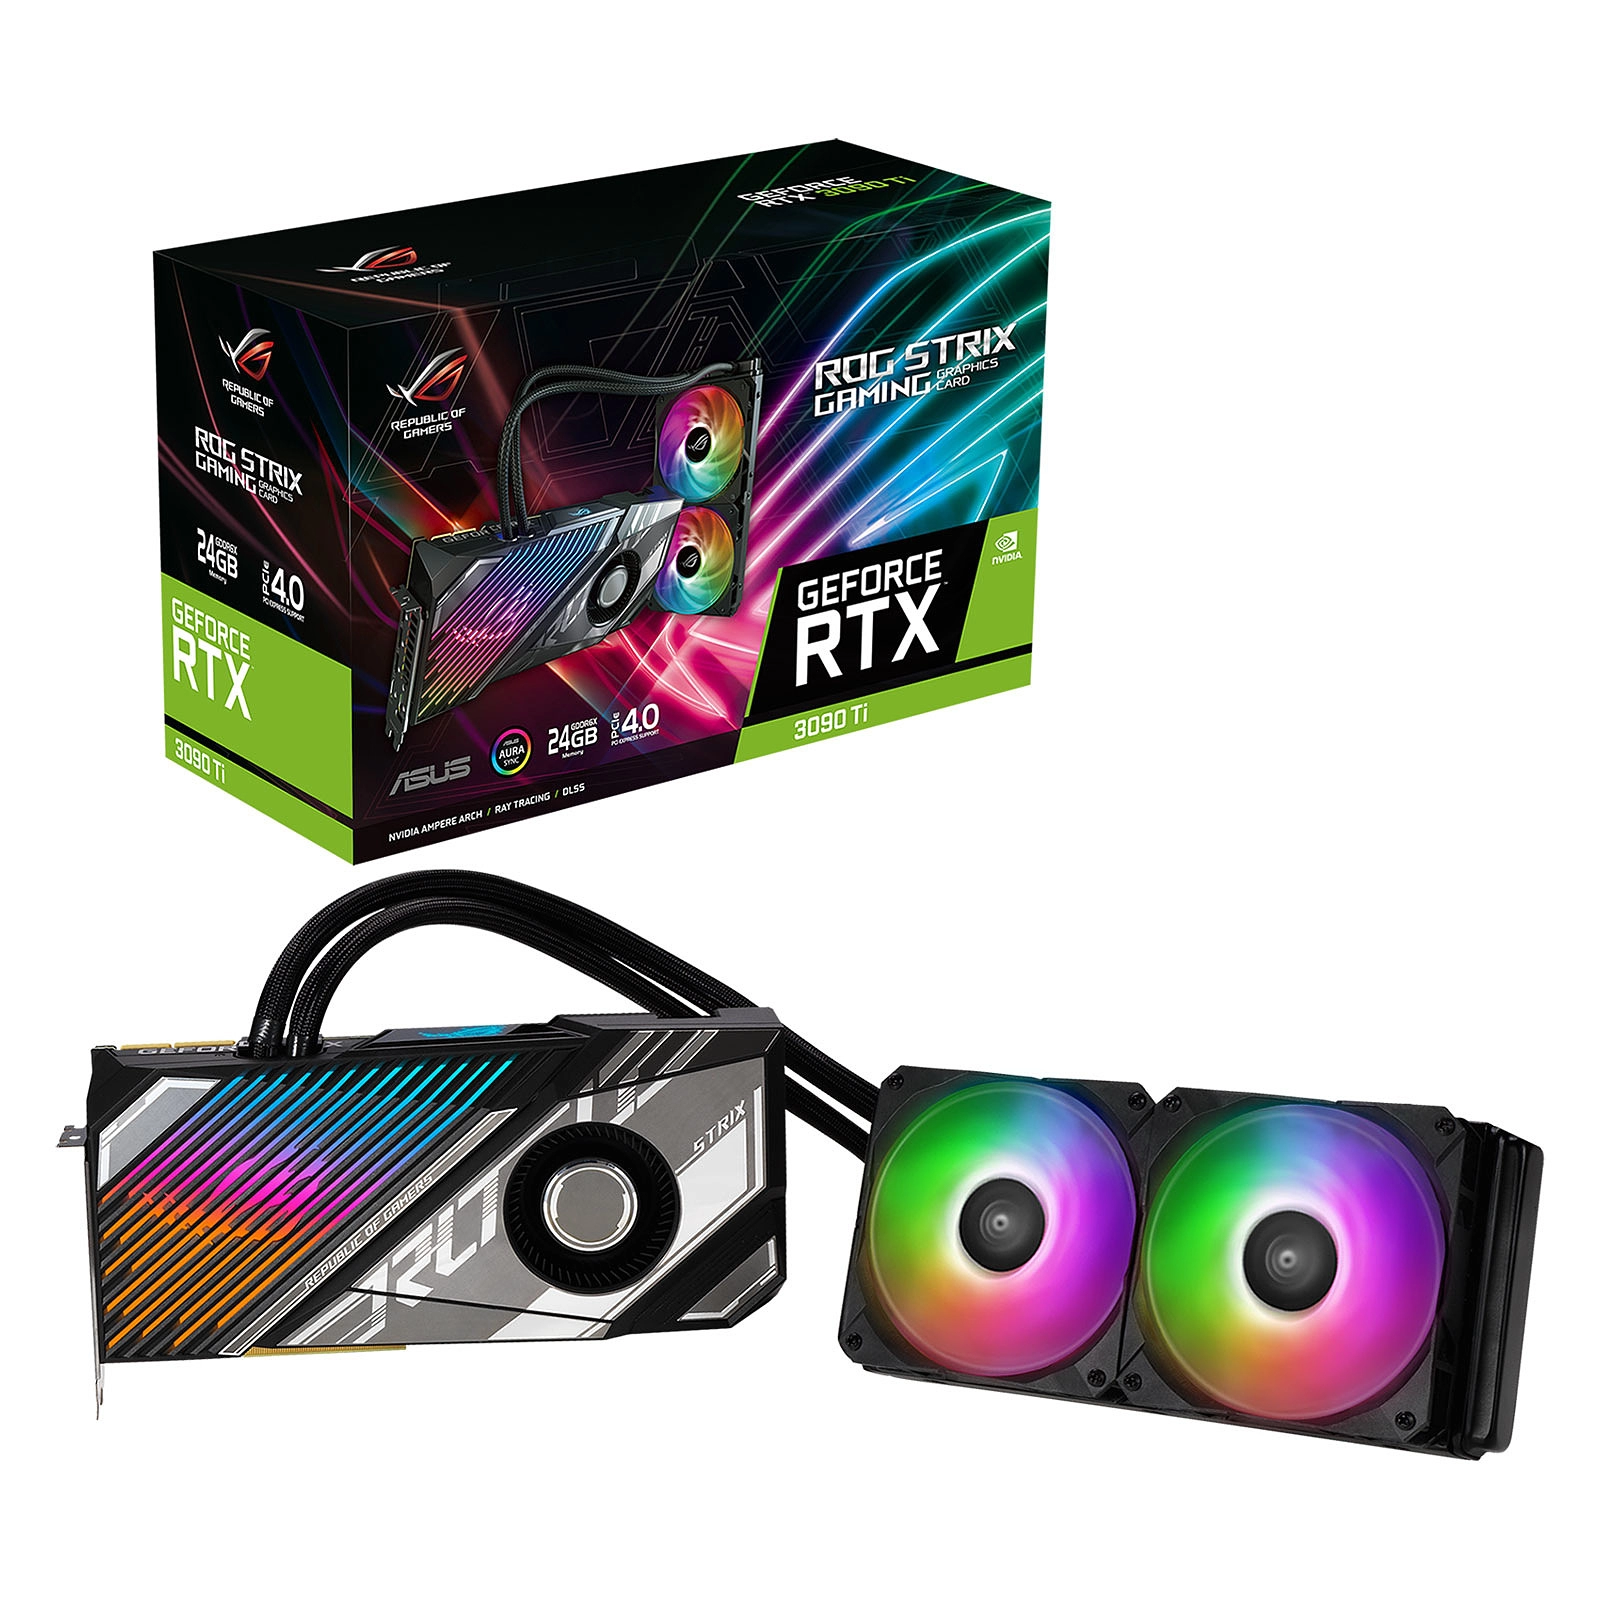 ASUS ROG STRIX LC RTX 3090 Ti Package